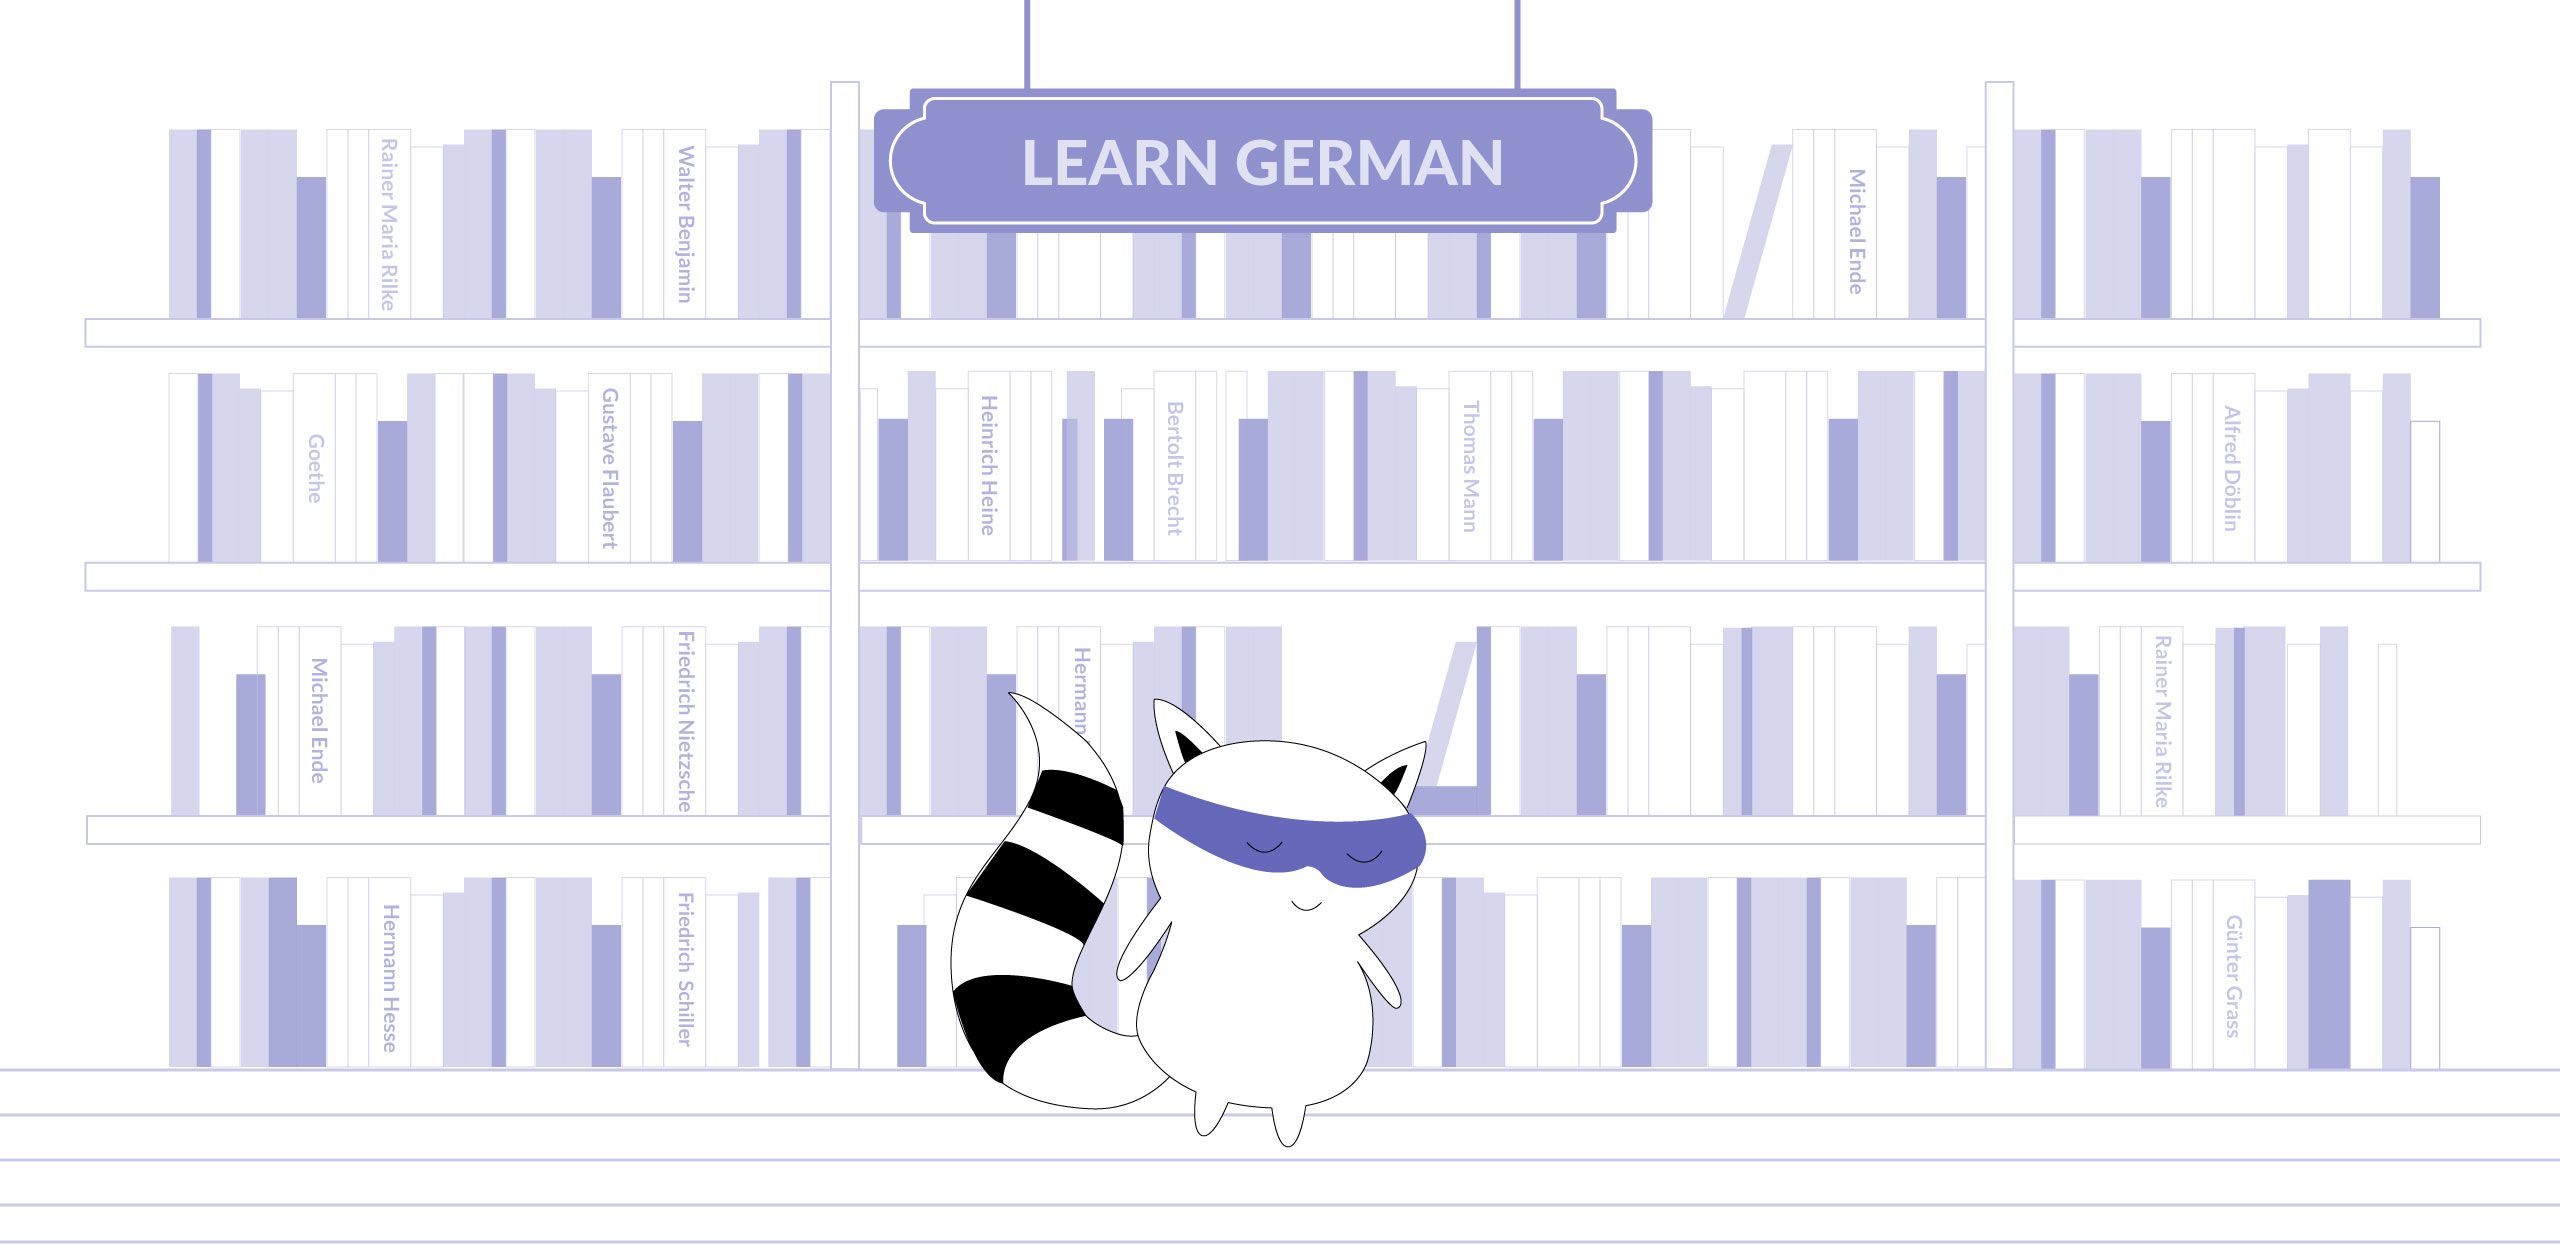 Best books to learn German